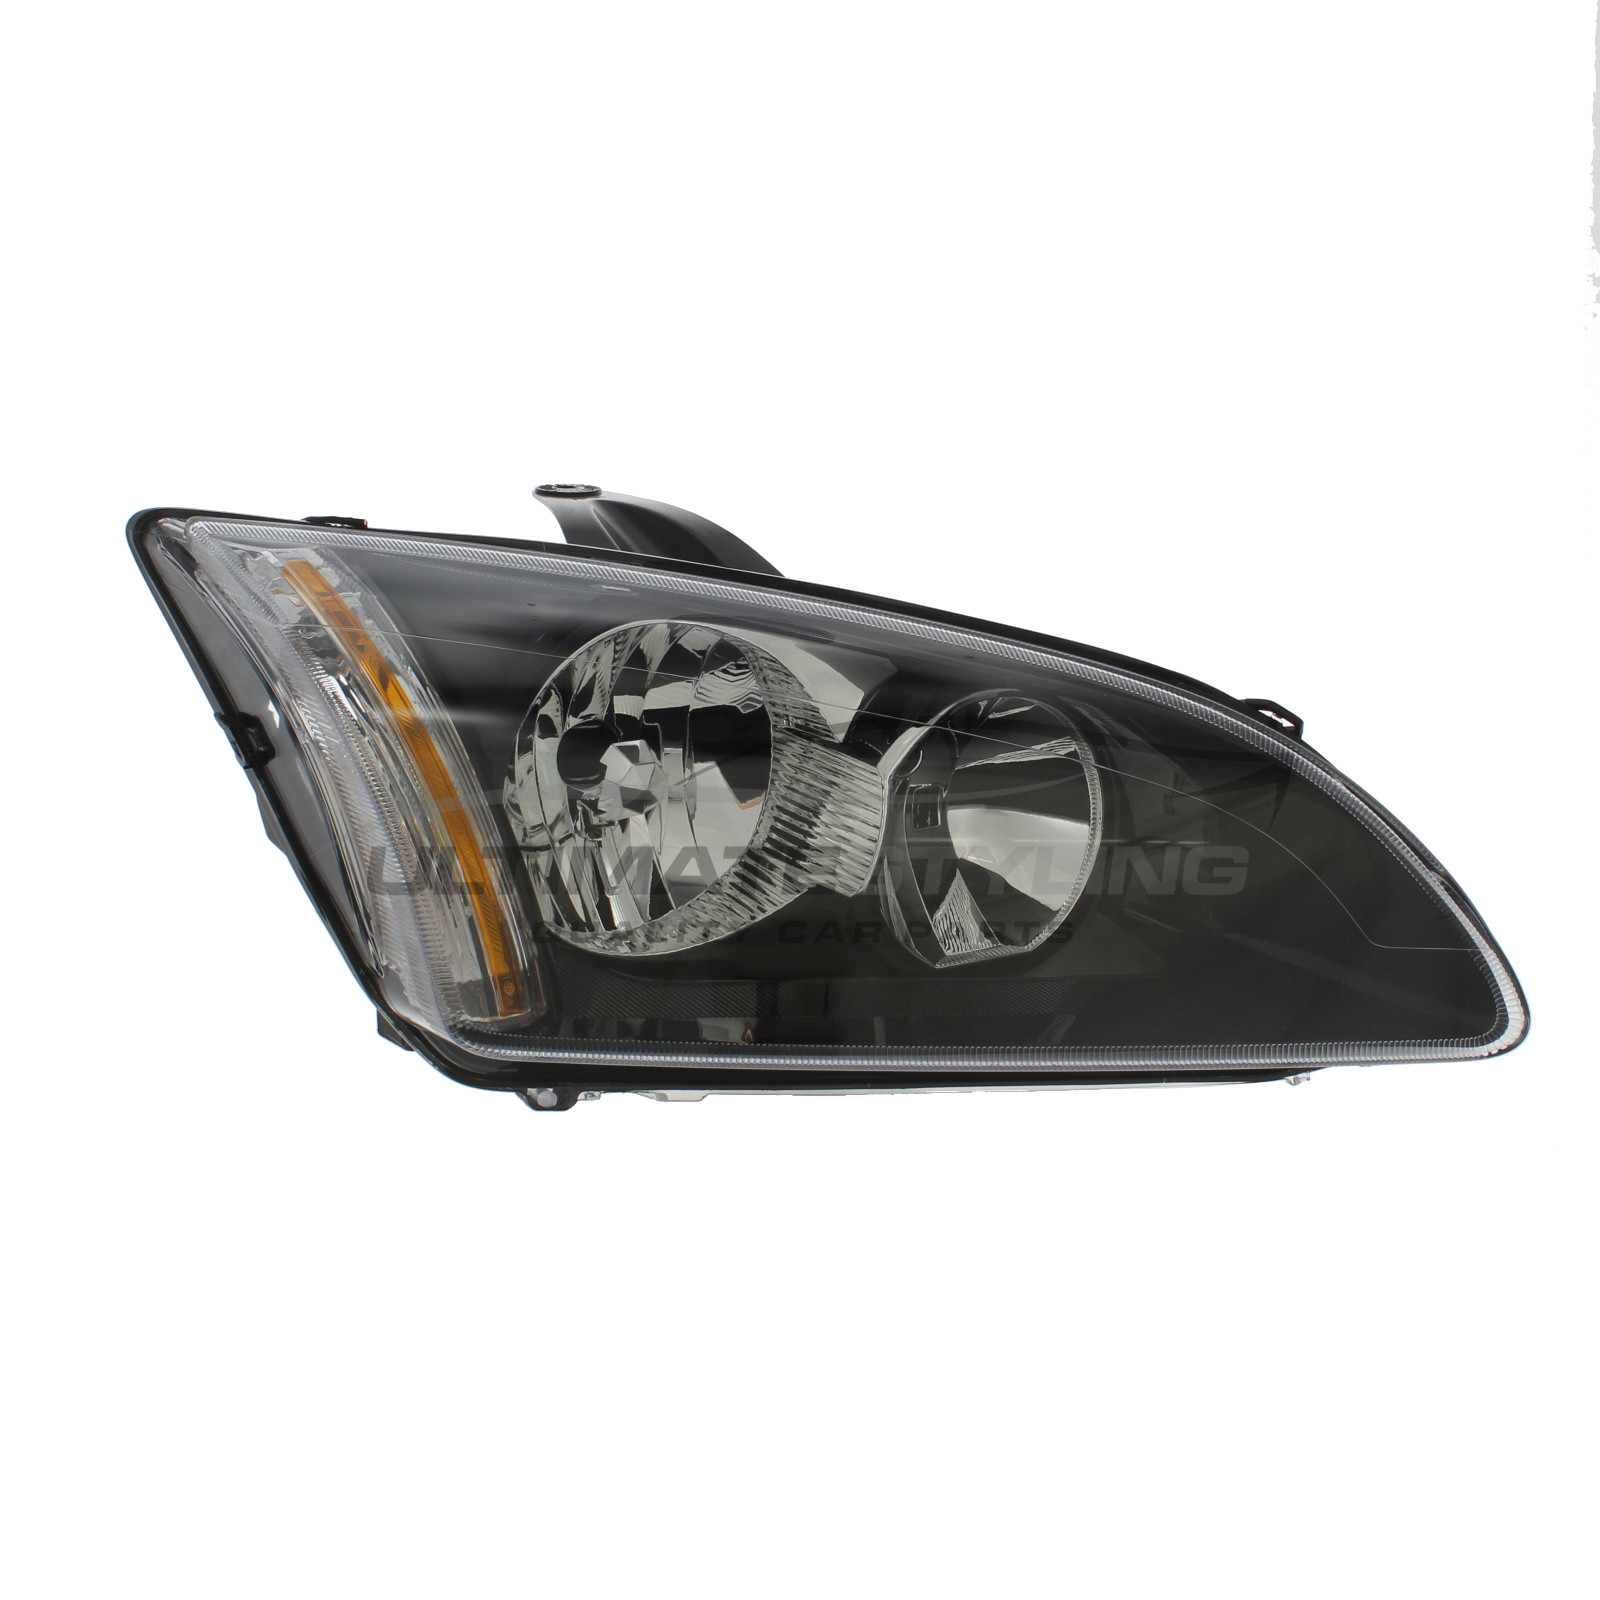 Ford Focus 2005-2008 Halogen, Electric Without Motor, Black Headlight / Headlamp Drivers Side (RH)